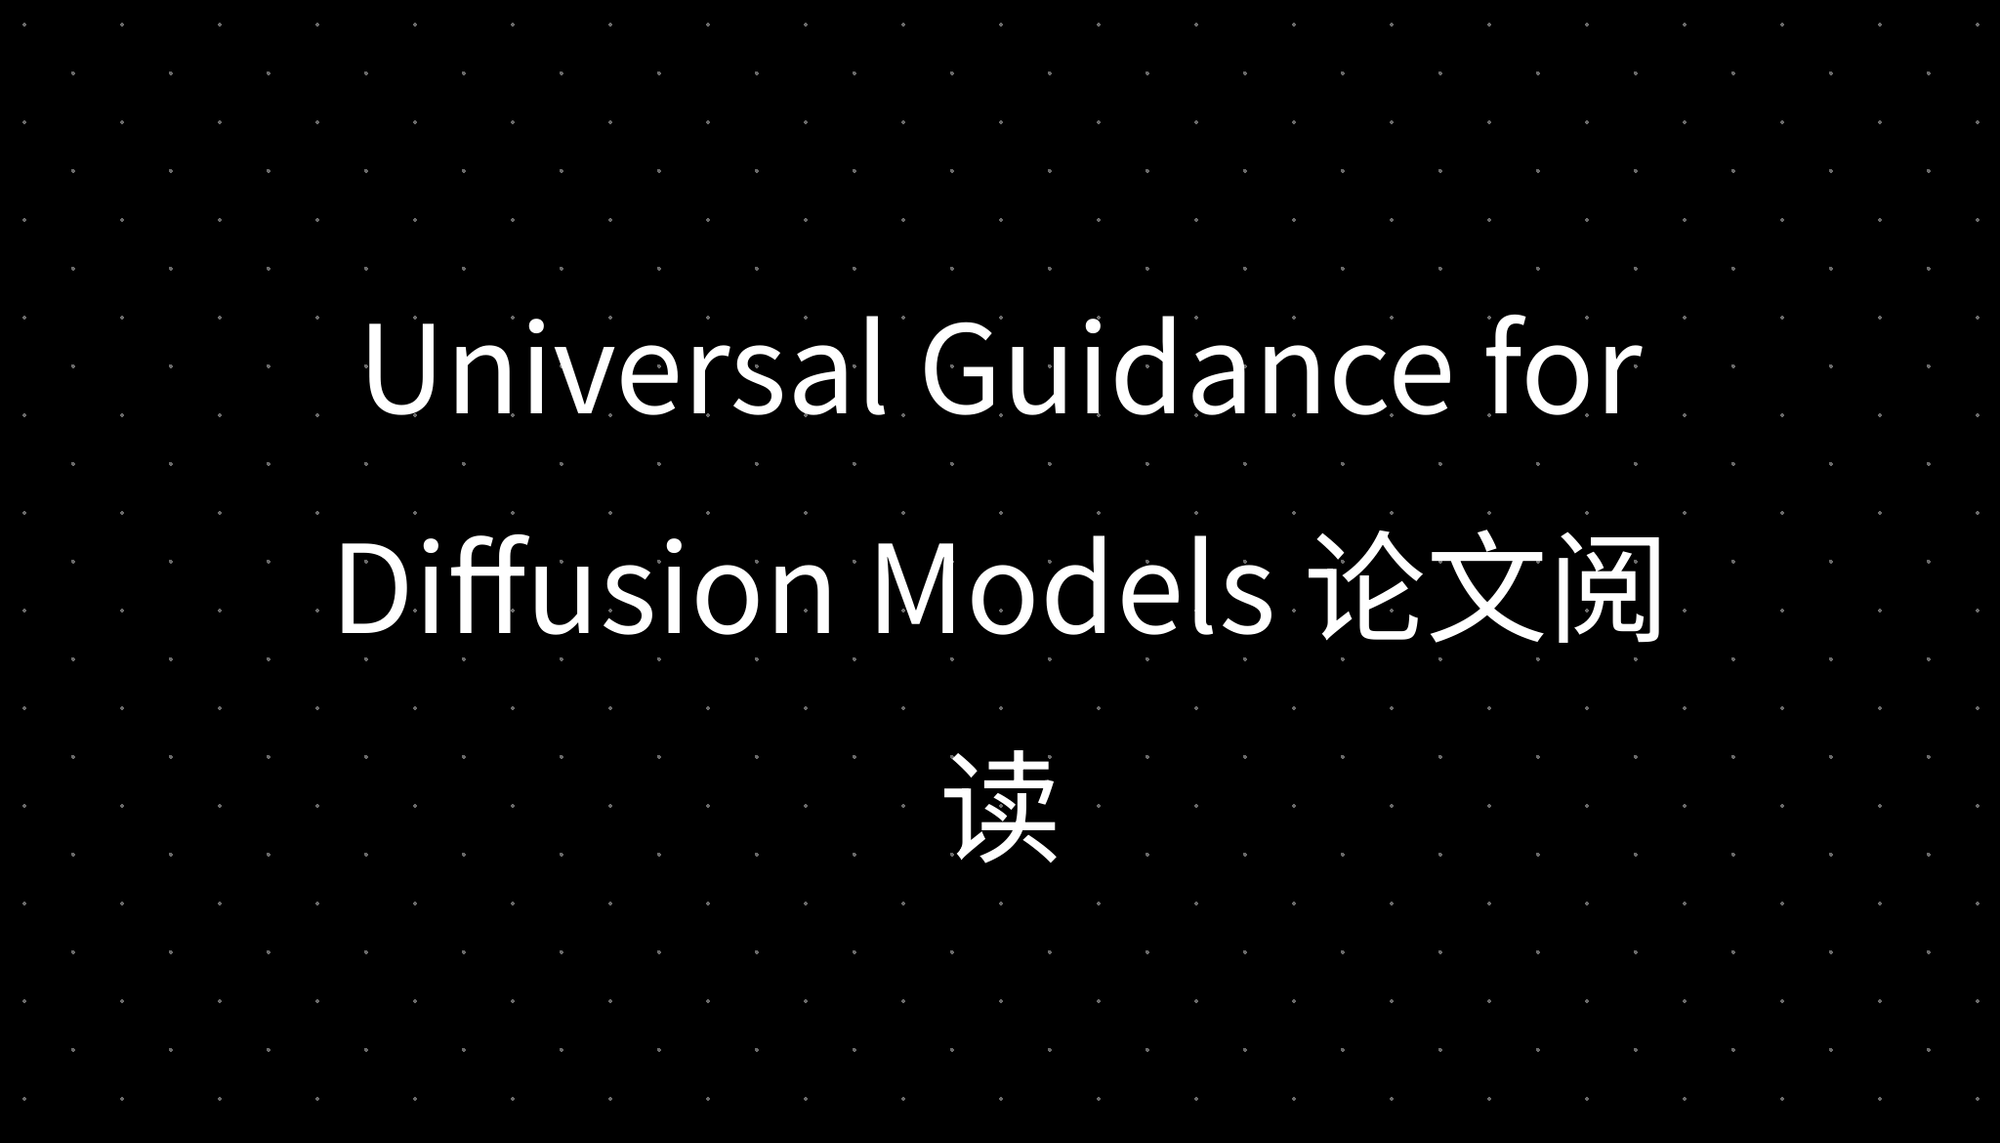 Universal Guidance for Diffusion Models 论文阅读